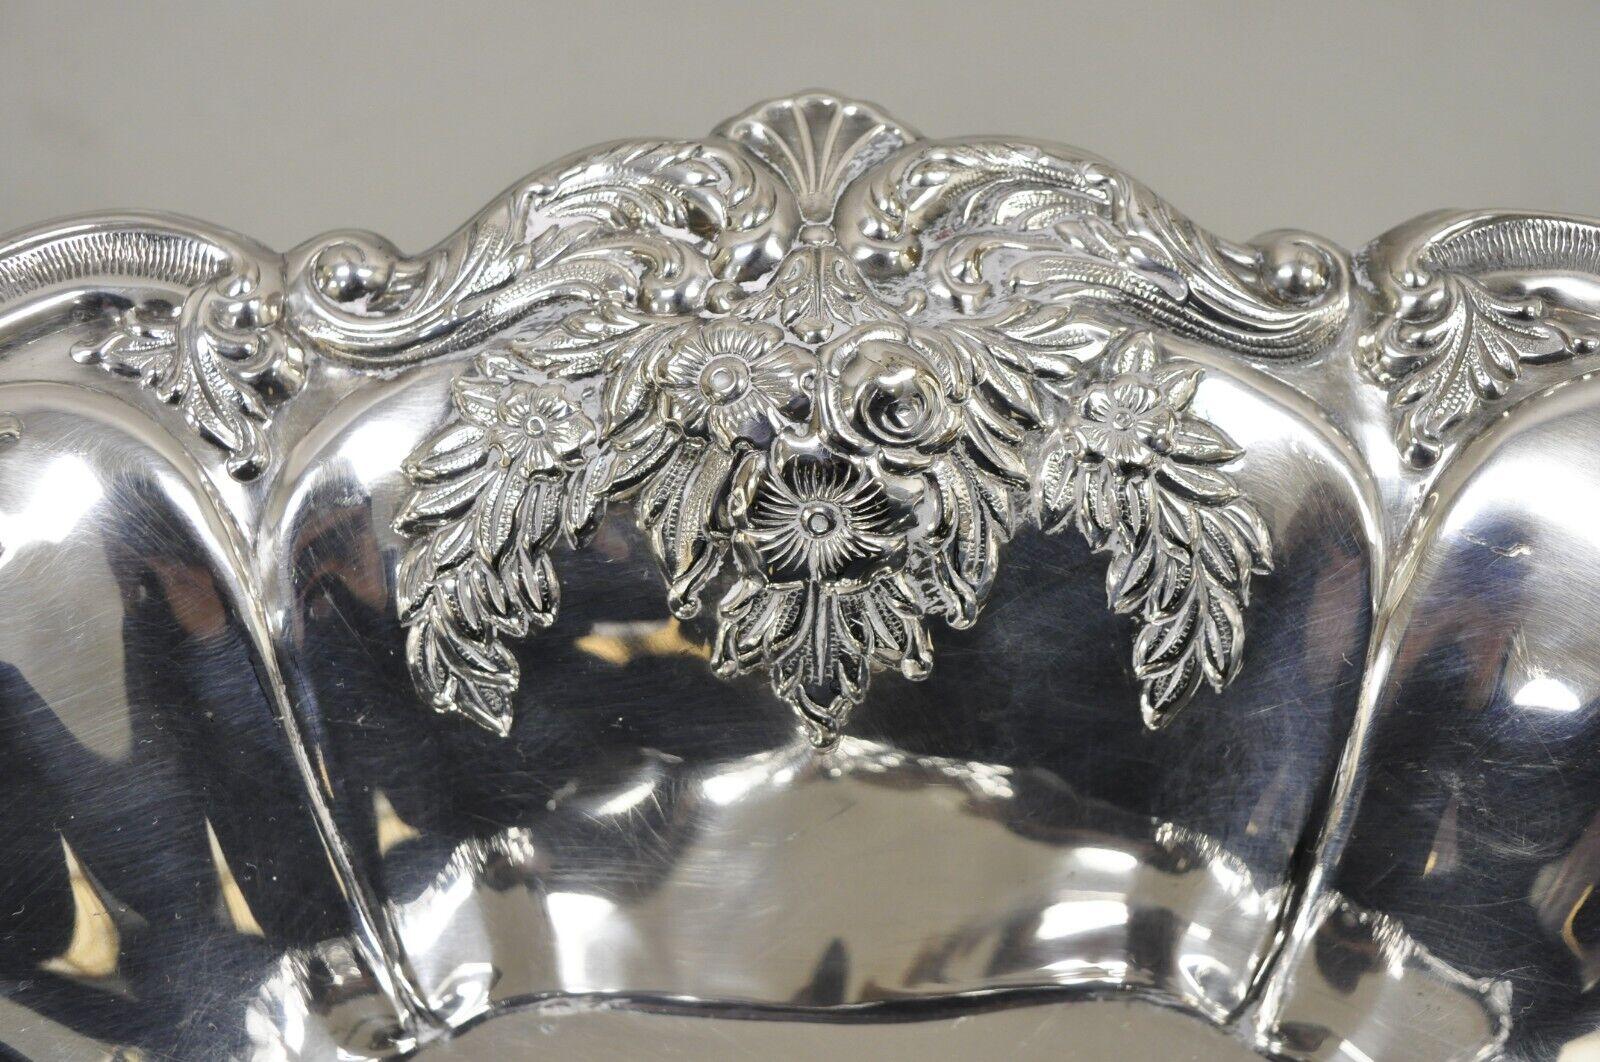 Victorian Silver Plated Floral Repousse Trinket Dish Serving Bowl Platter In Good Condition For Sale In Philadelphia, PA